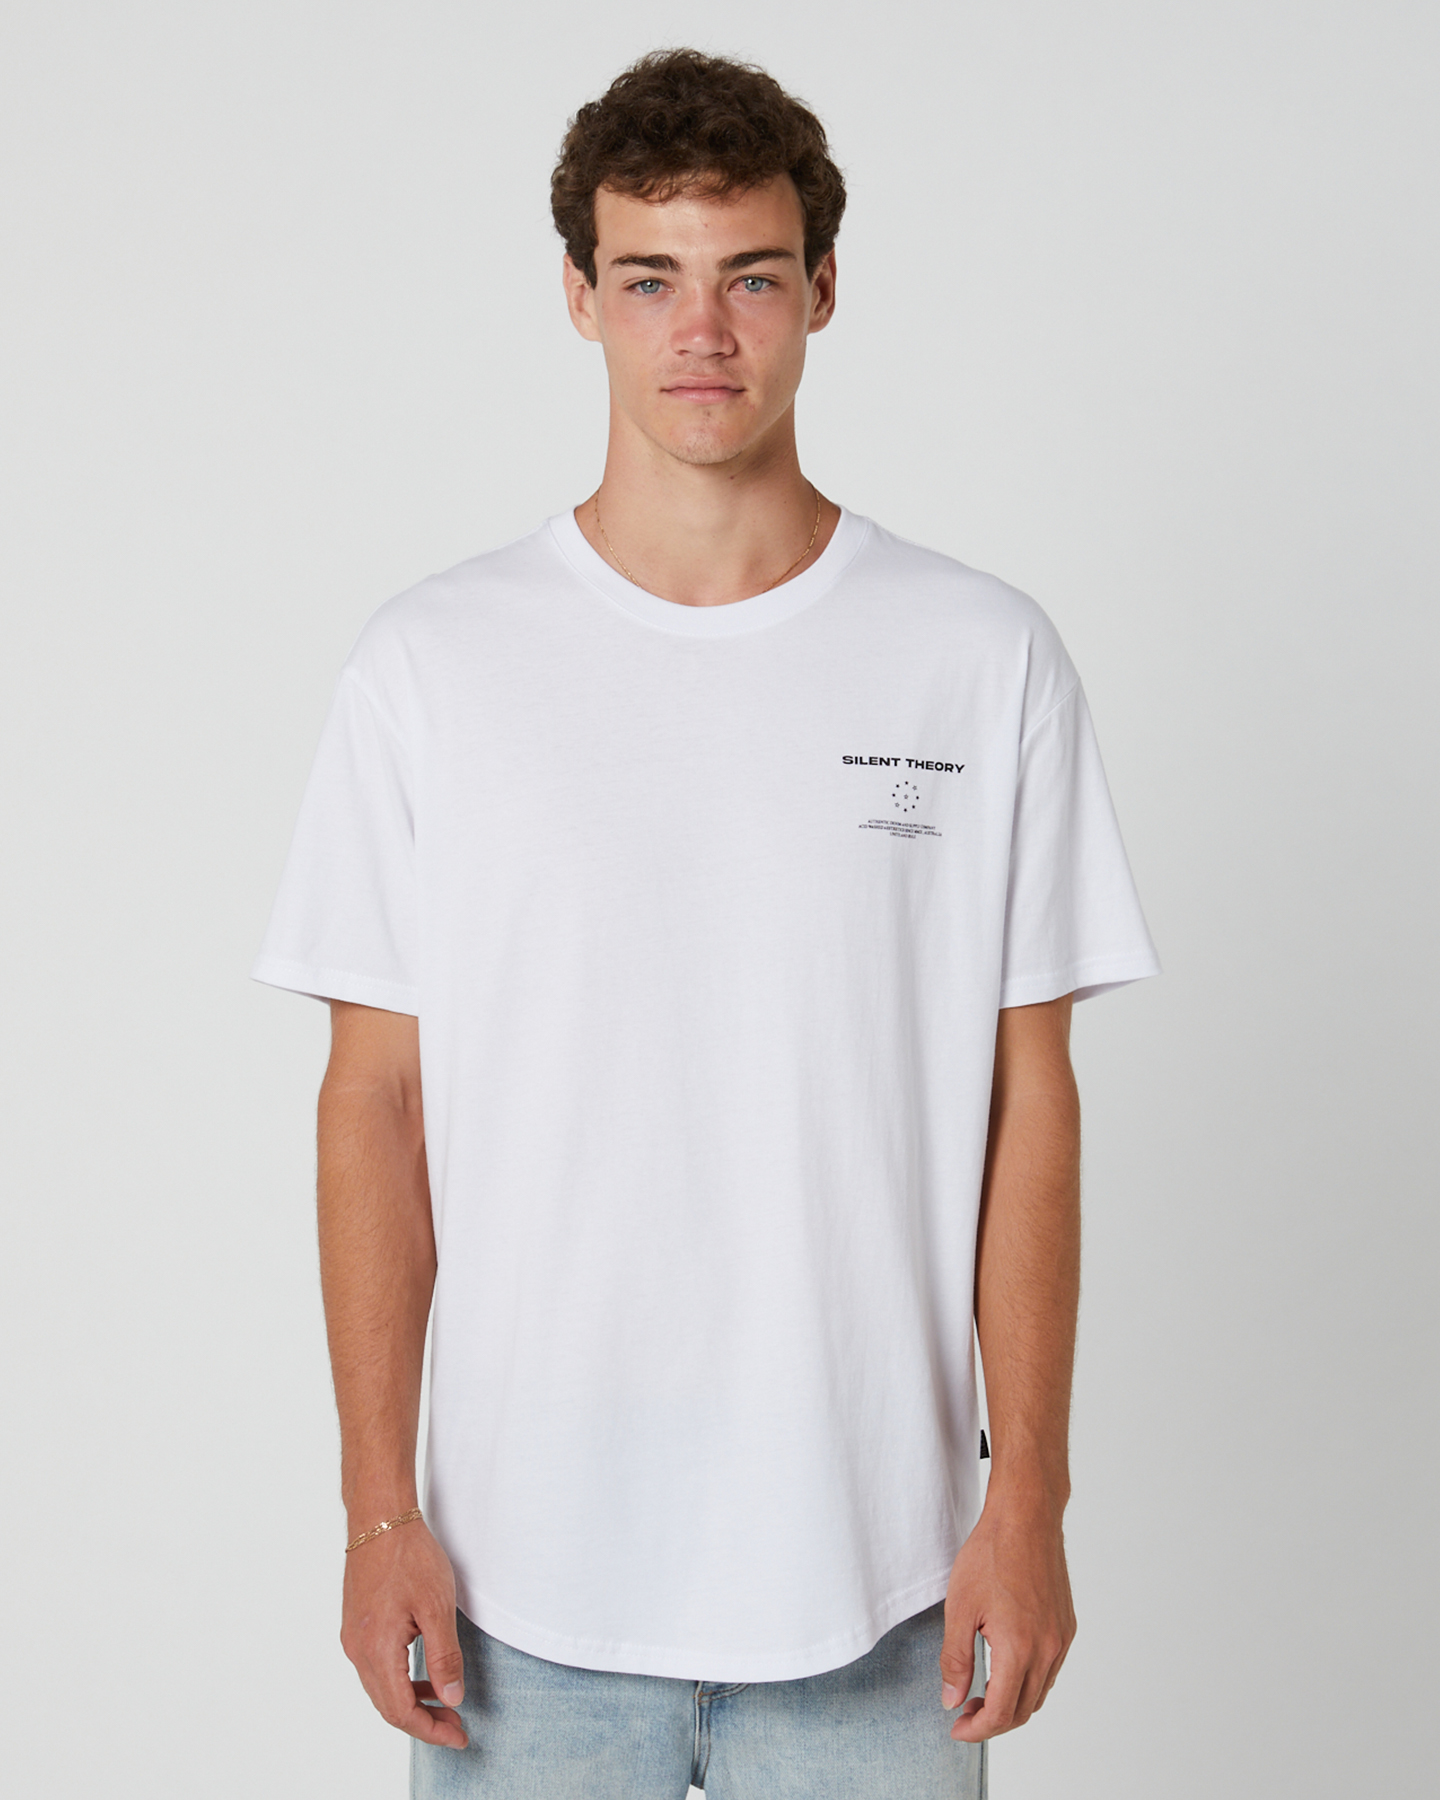 Silent Theory Shredder Tail Tee - White | SurfStitch